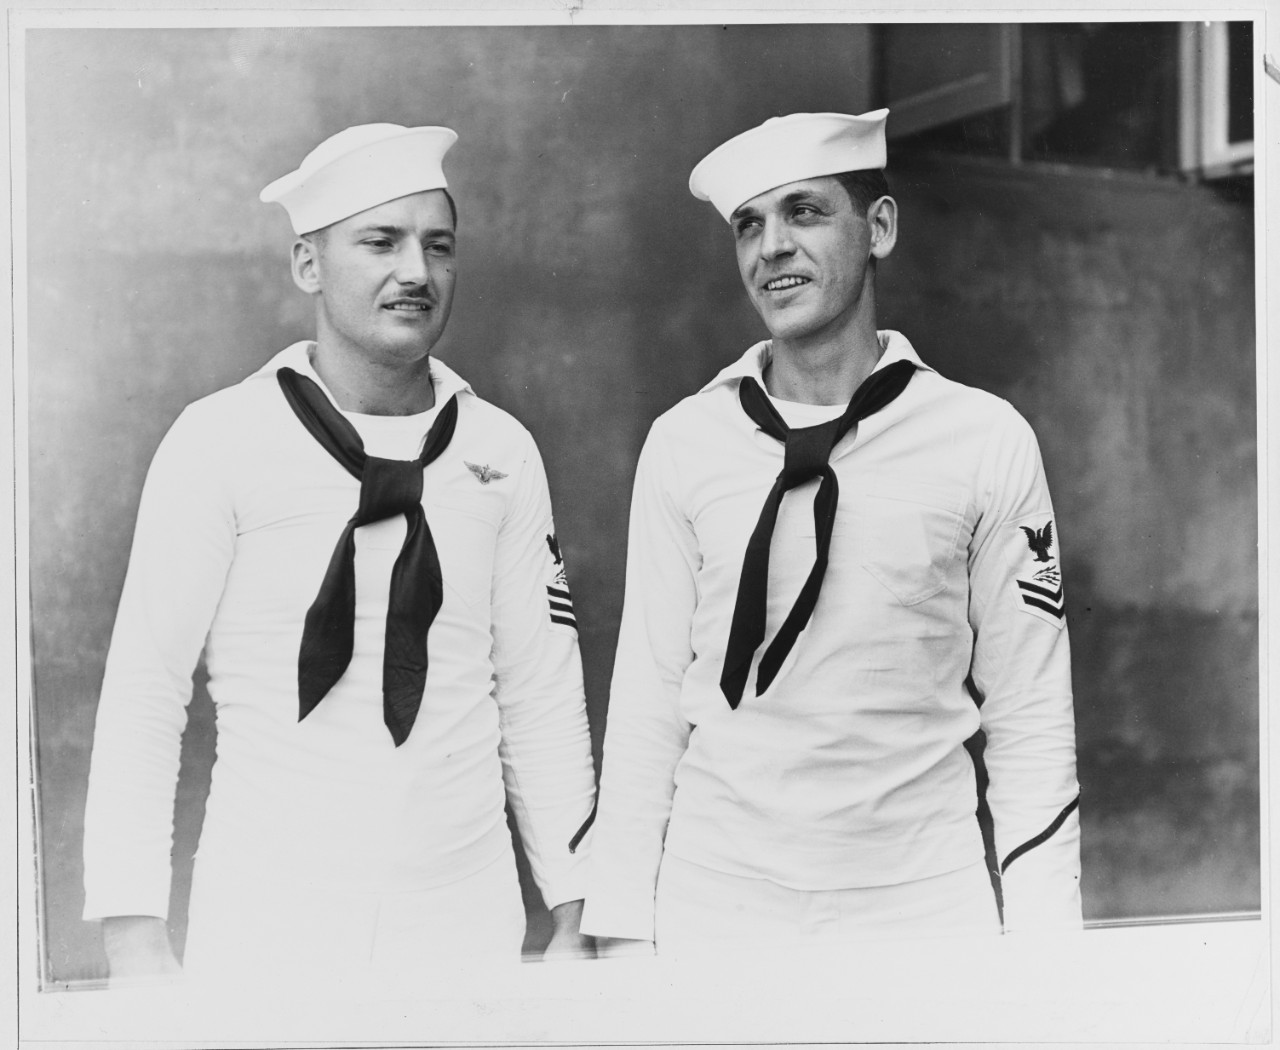 Left to right: Laverne L. Weiss, Naval Aviation Pilot and radioman; William B. Valyou.